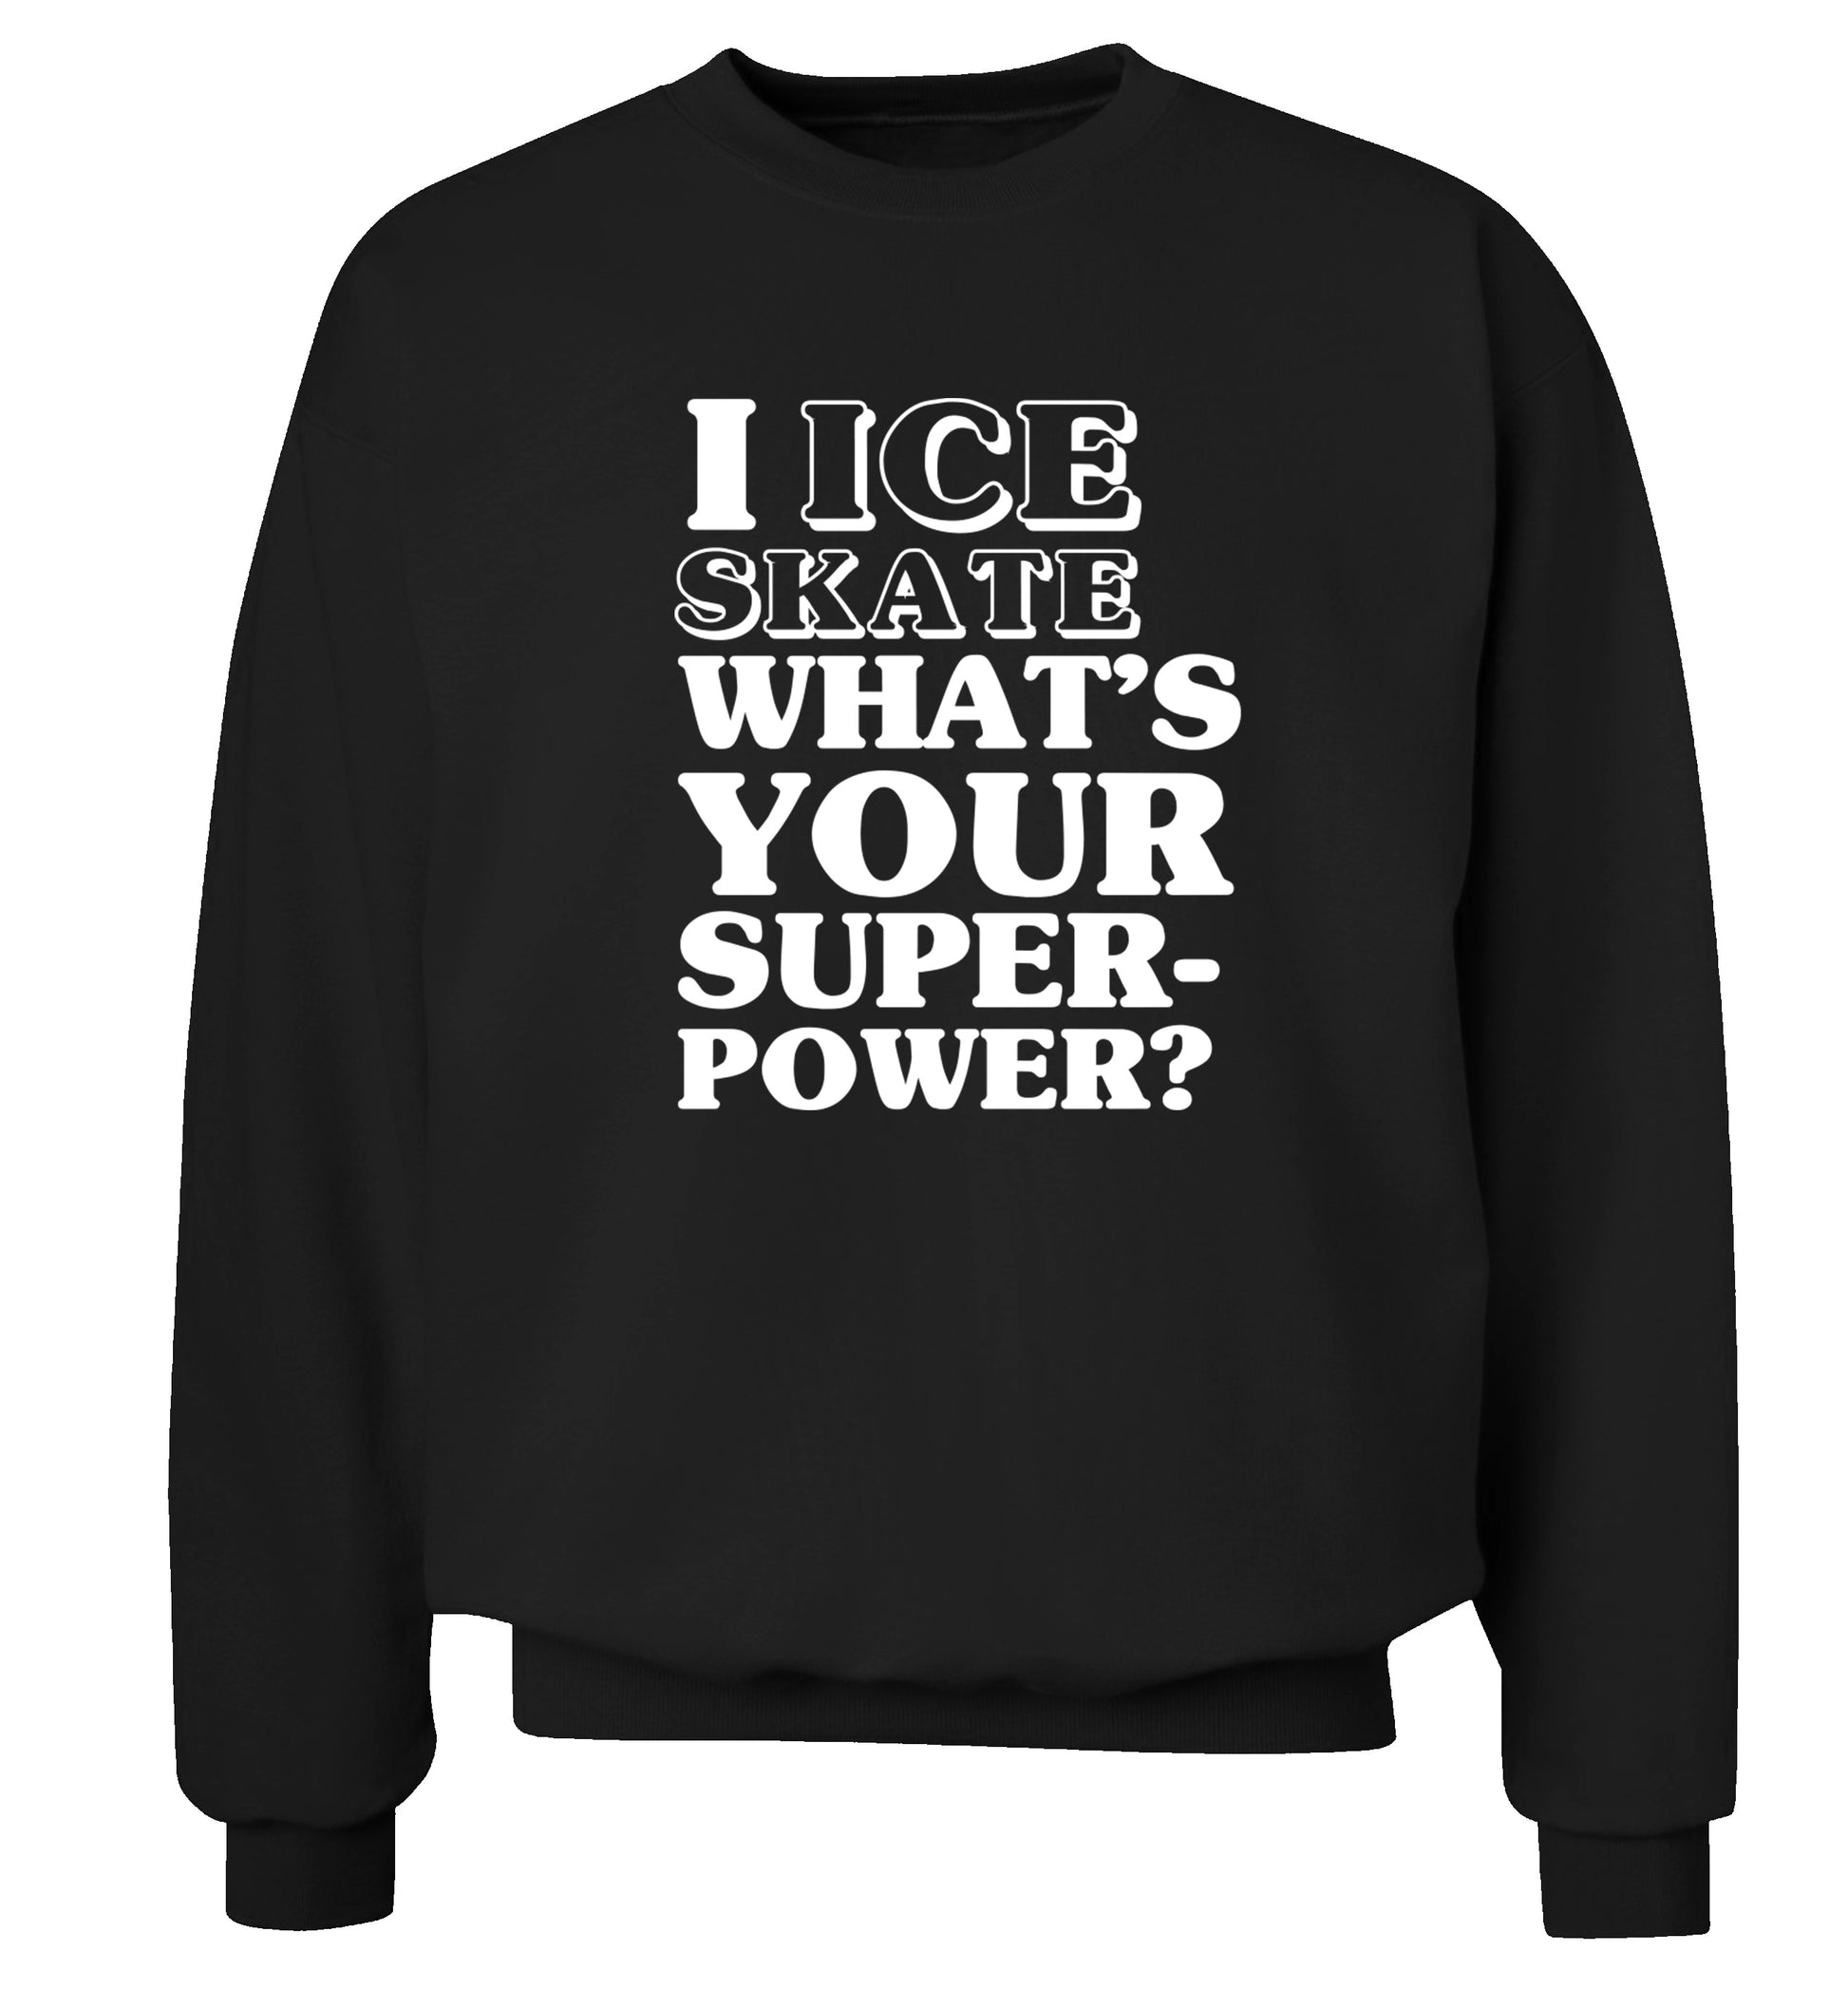 I ice skate what's your superpower? Adult's unisexblack Sweater 2XL